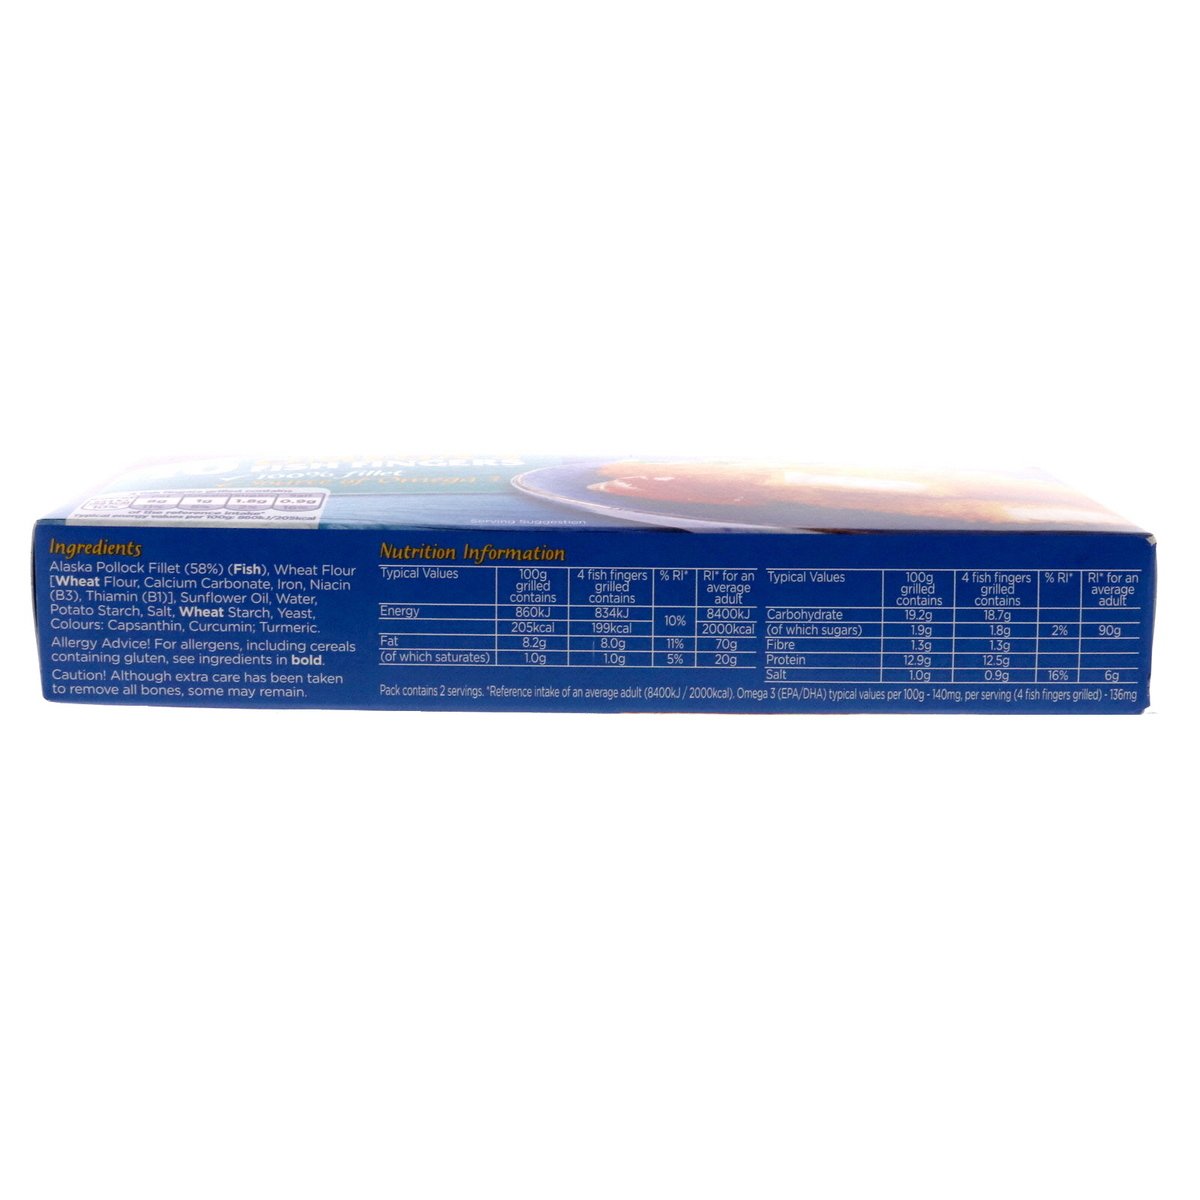 Young's Omega 3 Fish Fingers 250 g